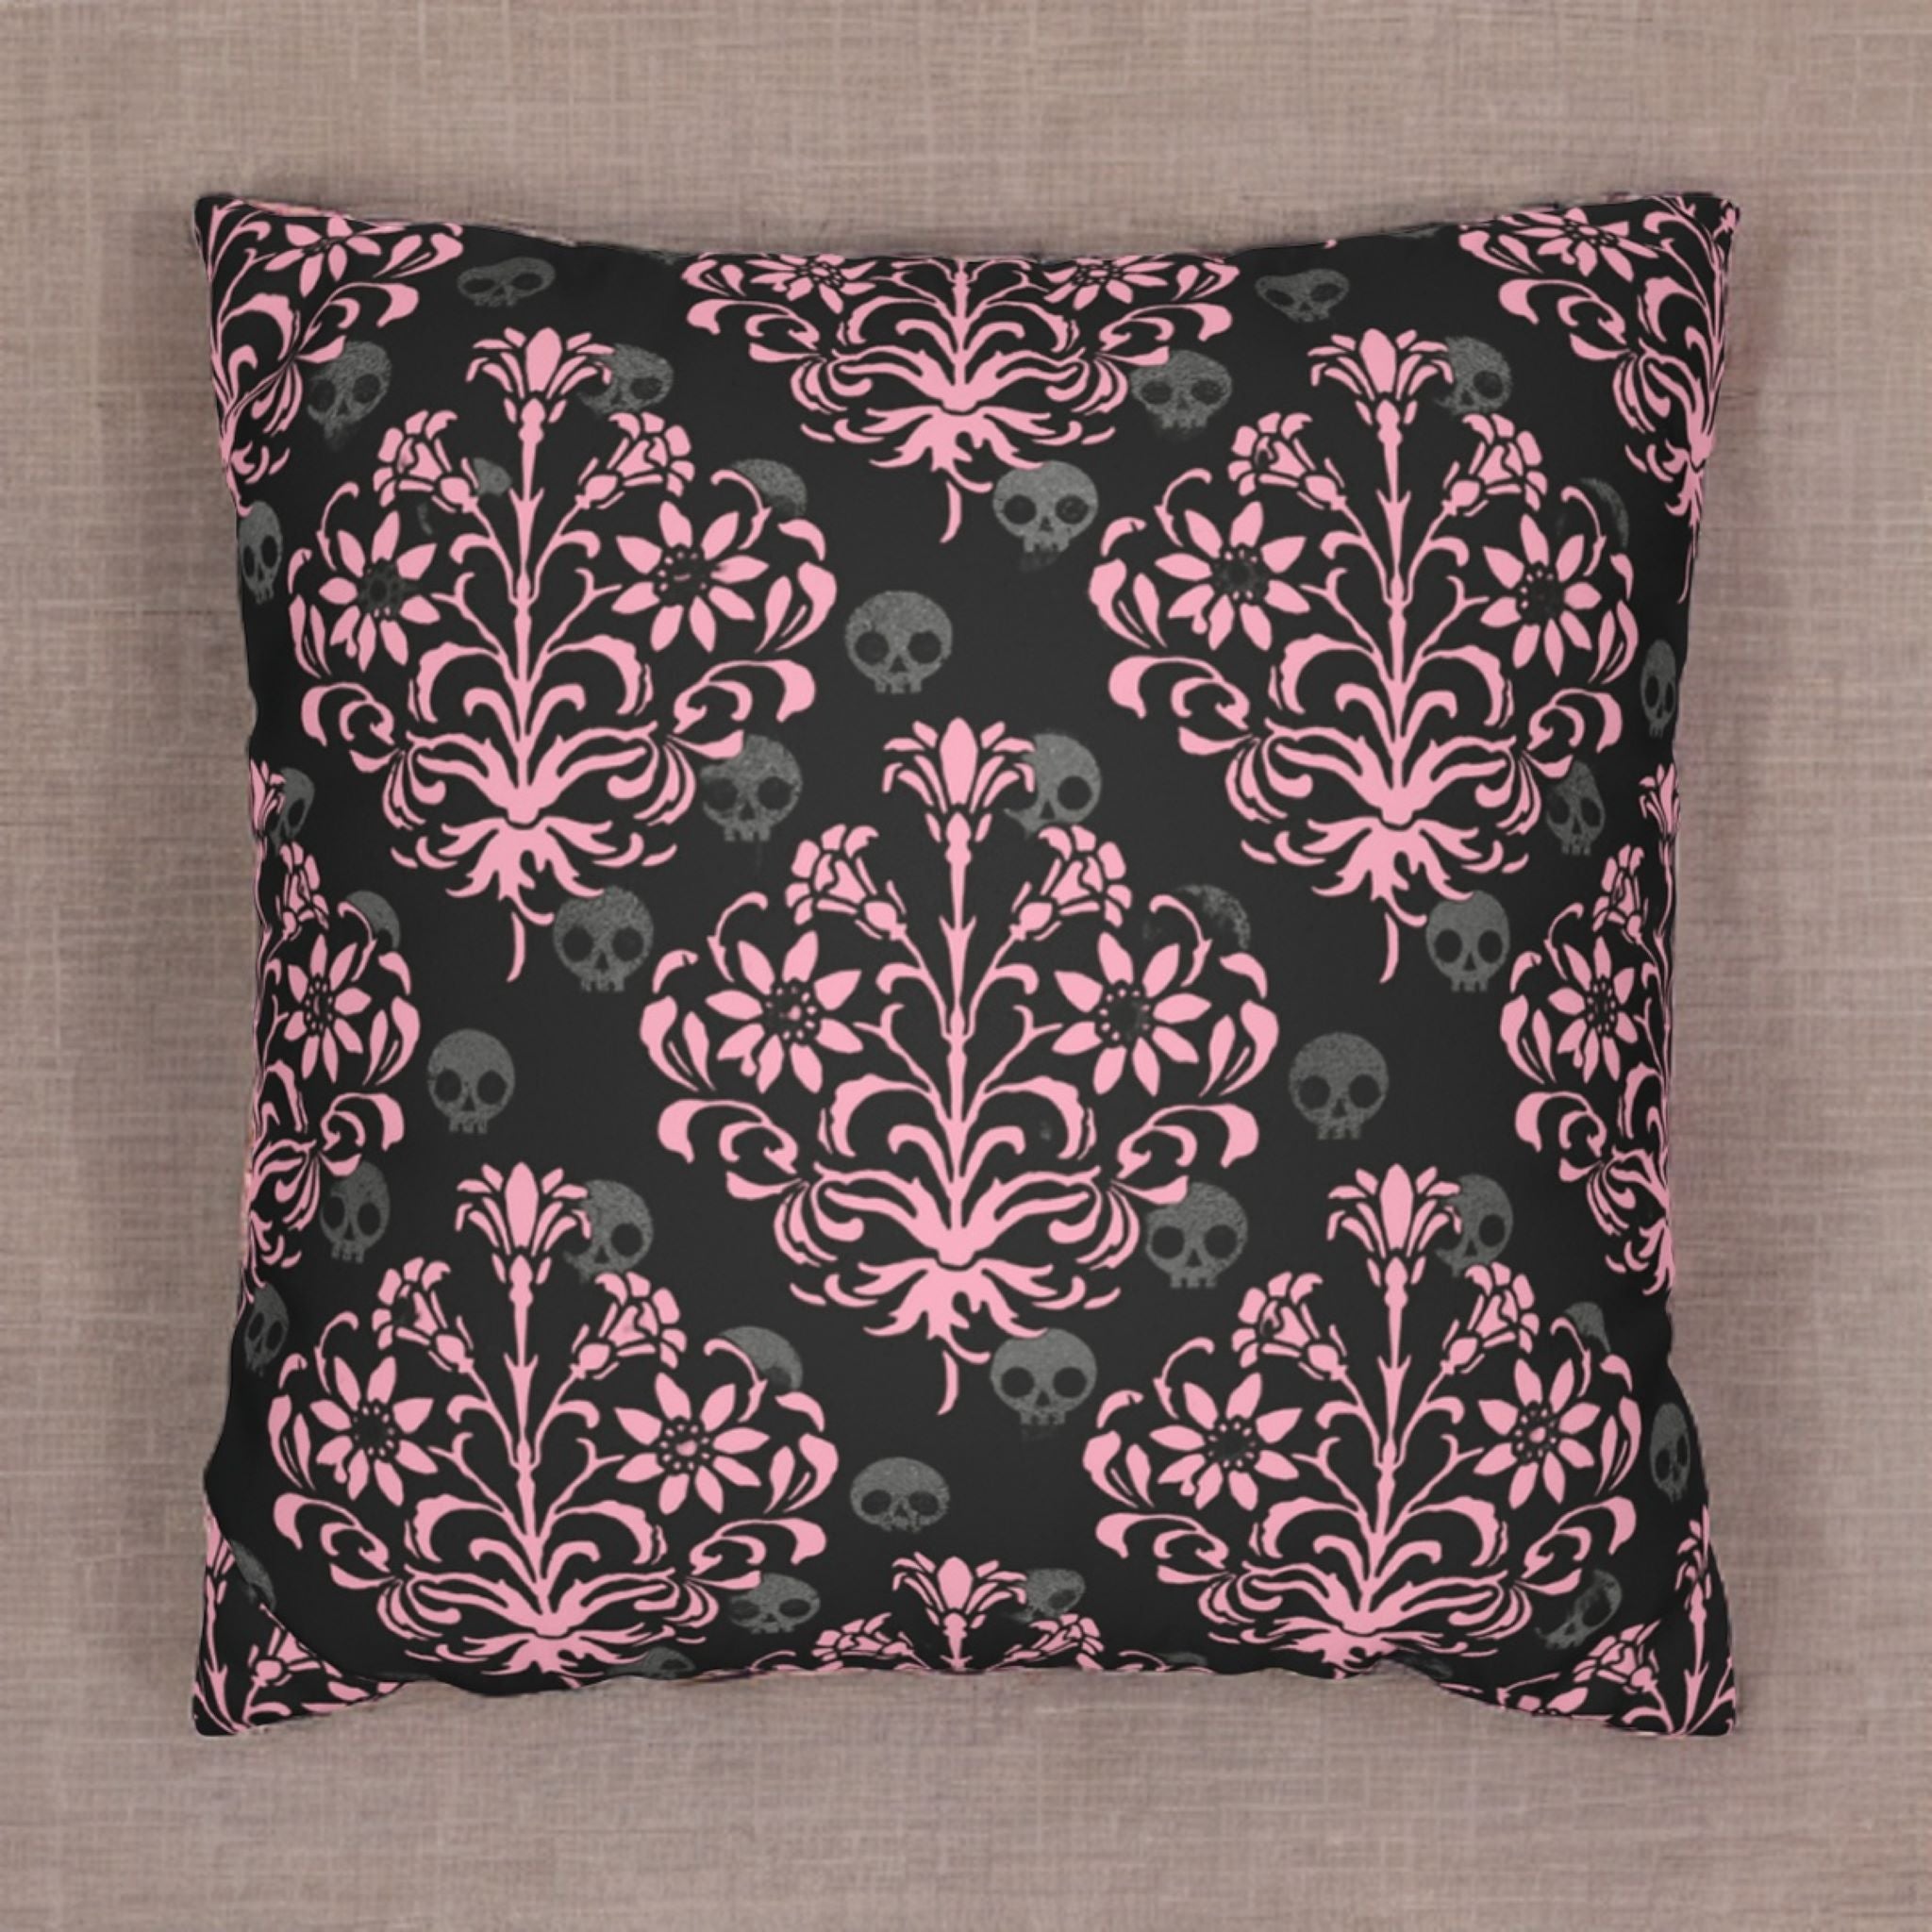 Pastel Gothic Damask Skulls Decorative Pillow Cover in Faux Suede